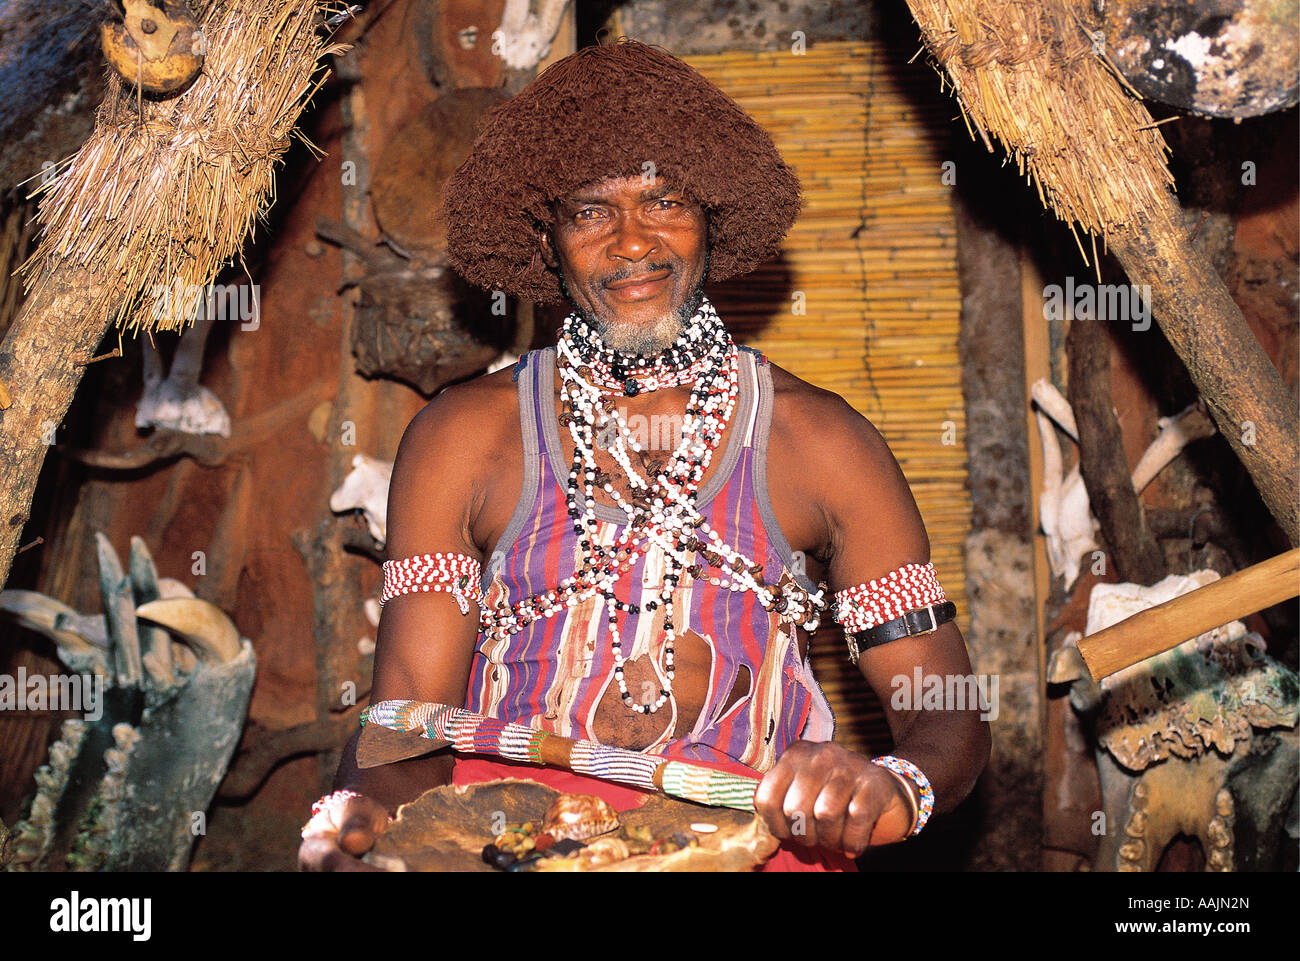 Shangaan sangoma Witch Doctor in Shangaan cultural village Mpumalanga South Africa - Stock Image